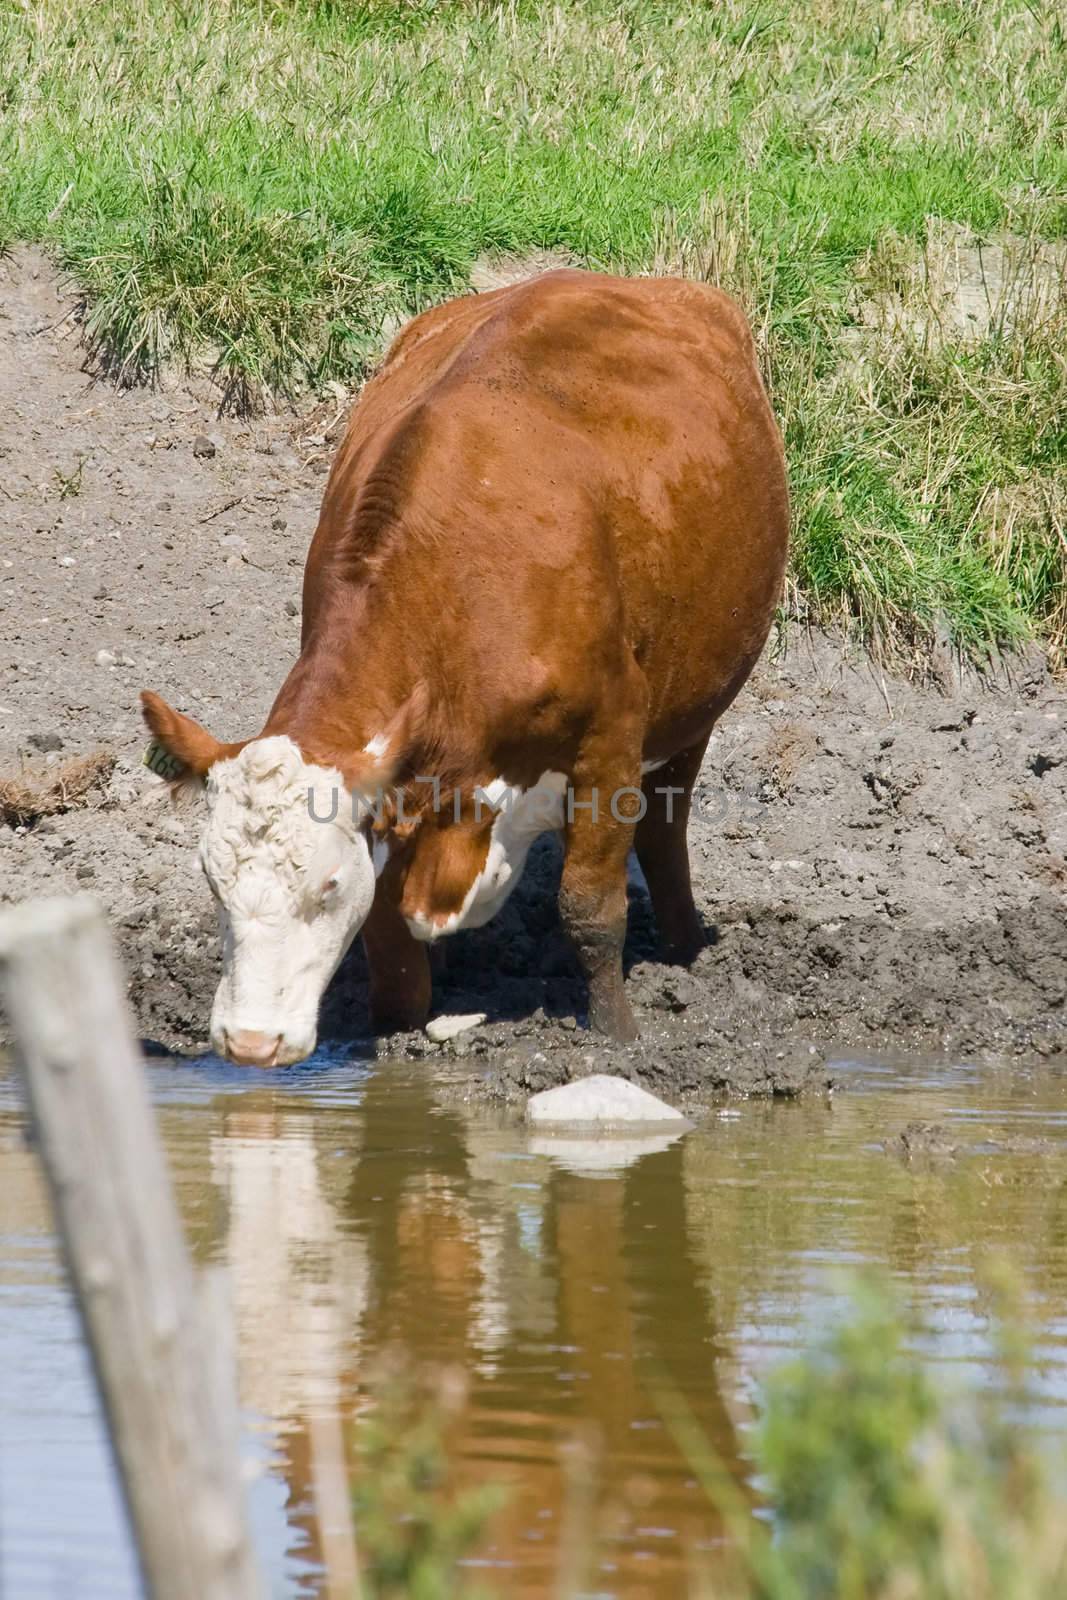 A Cow taking a drink at a local watering hole, with his reflection visible in the pond.